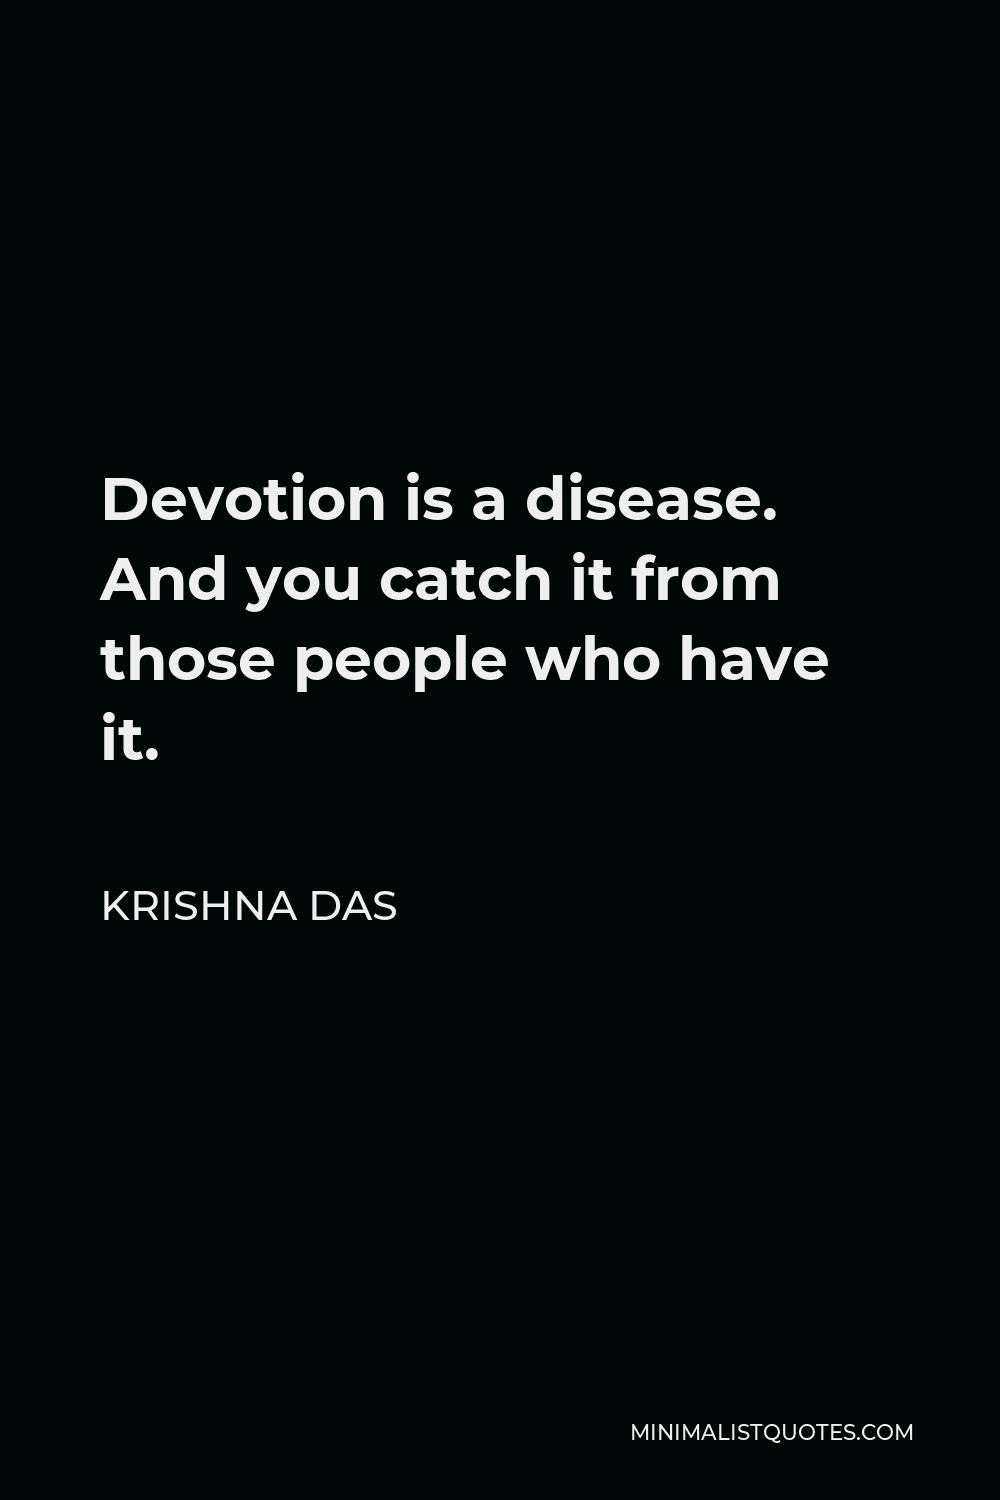 Krishna Das Quote - Devotion is a disease. And you catch it from those people who have it.